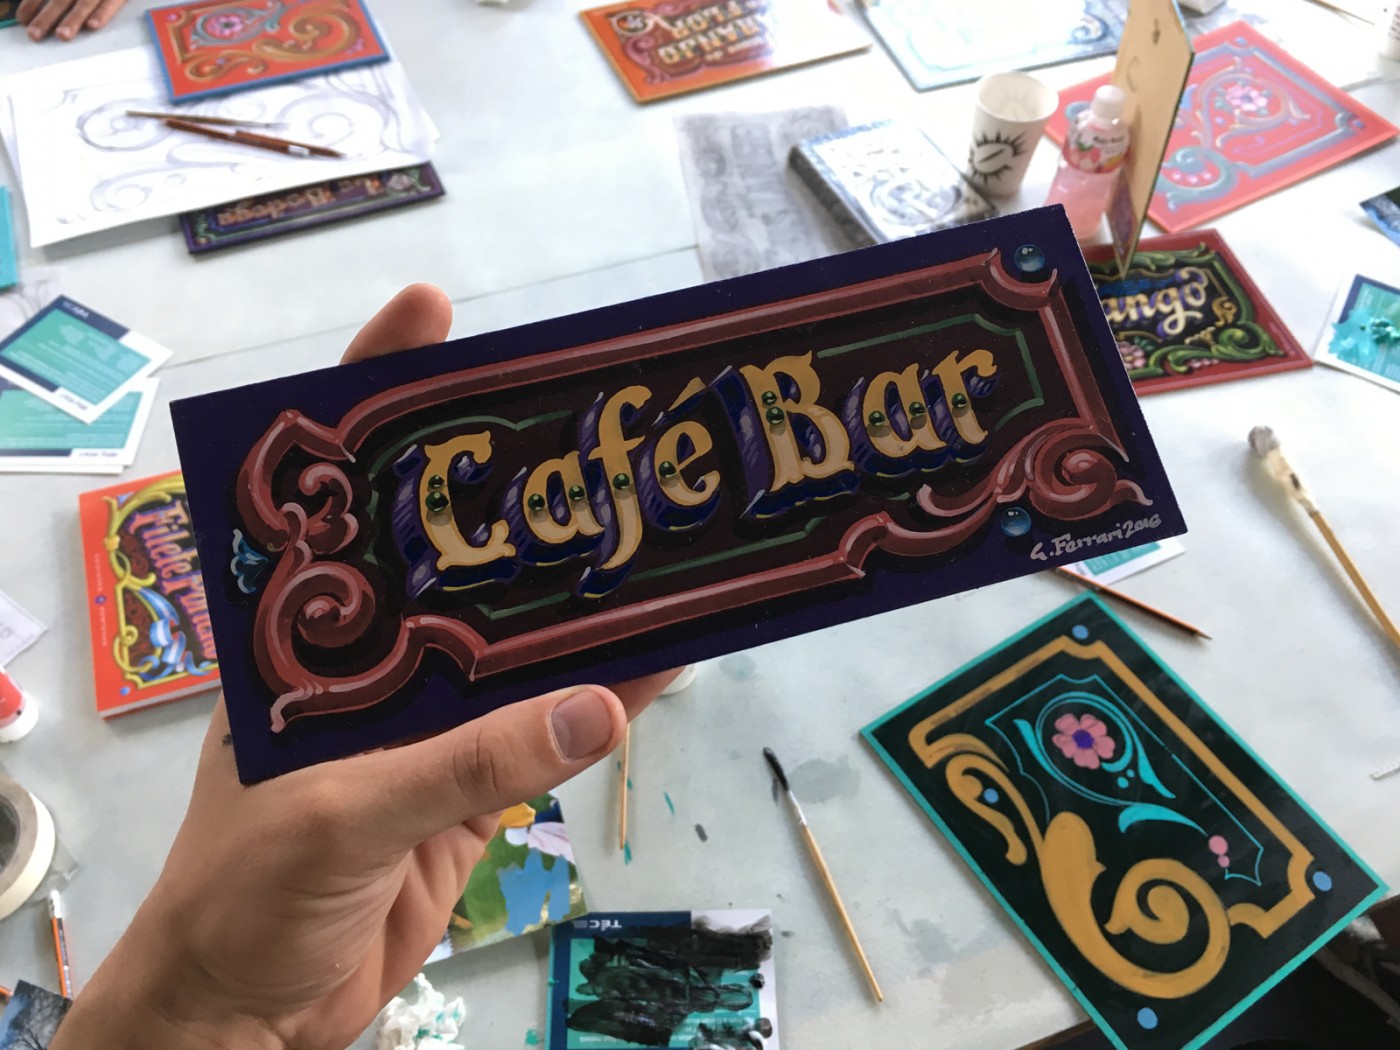 Cafe Bar Handpainted Sign Amsterdam 2016